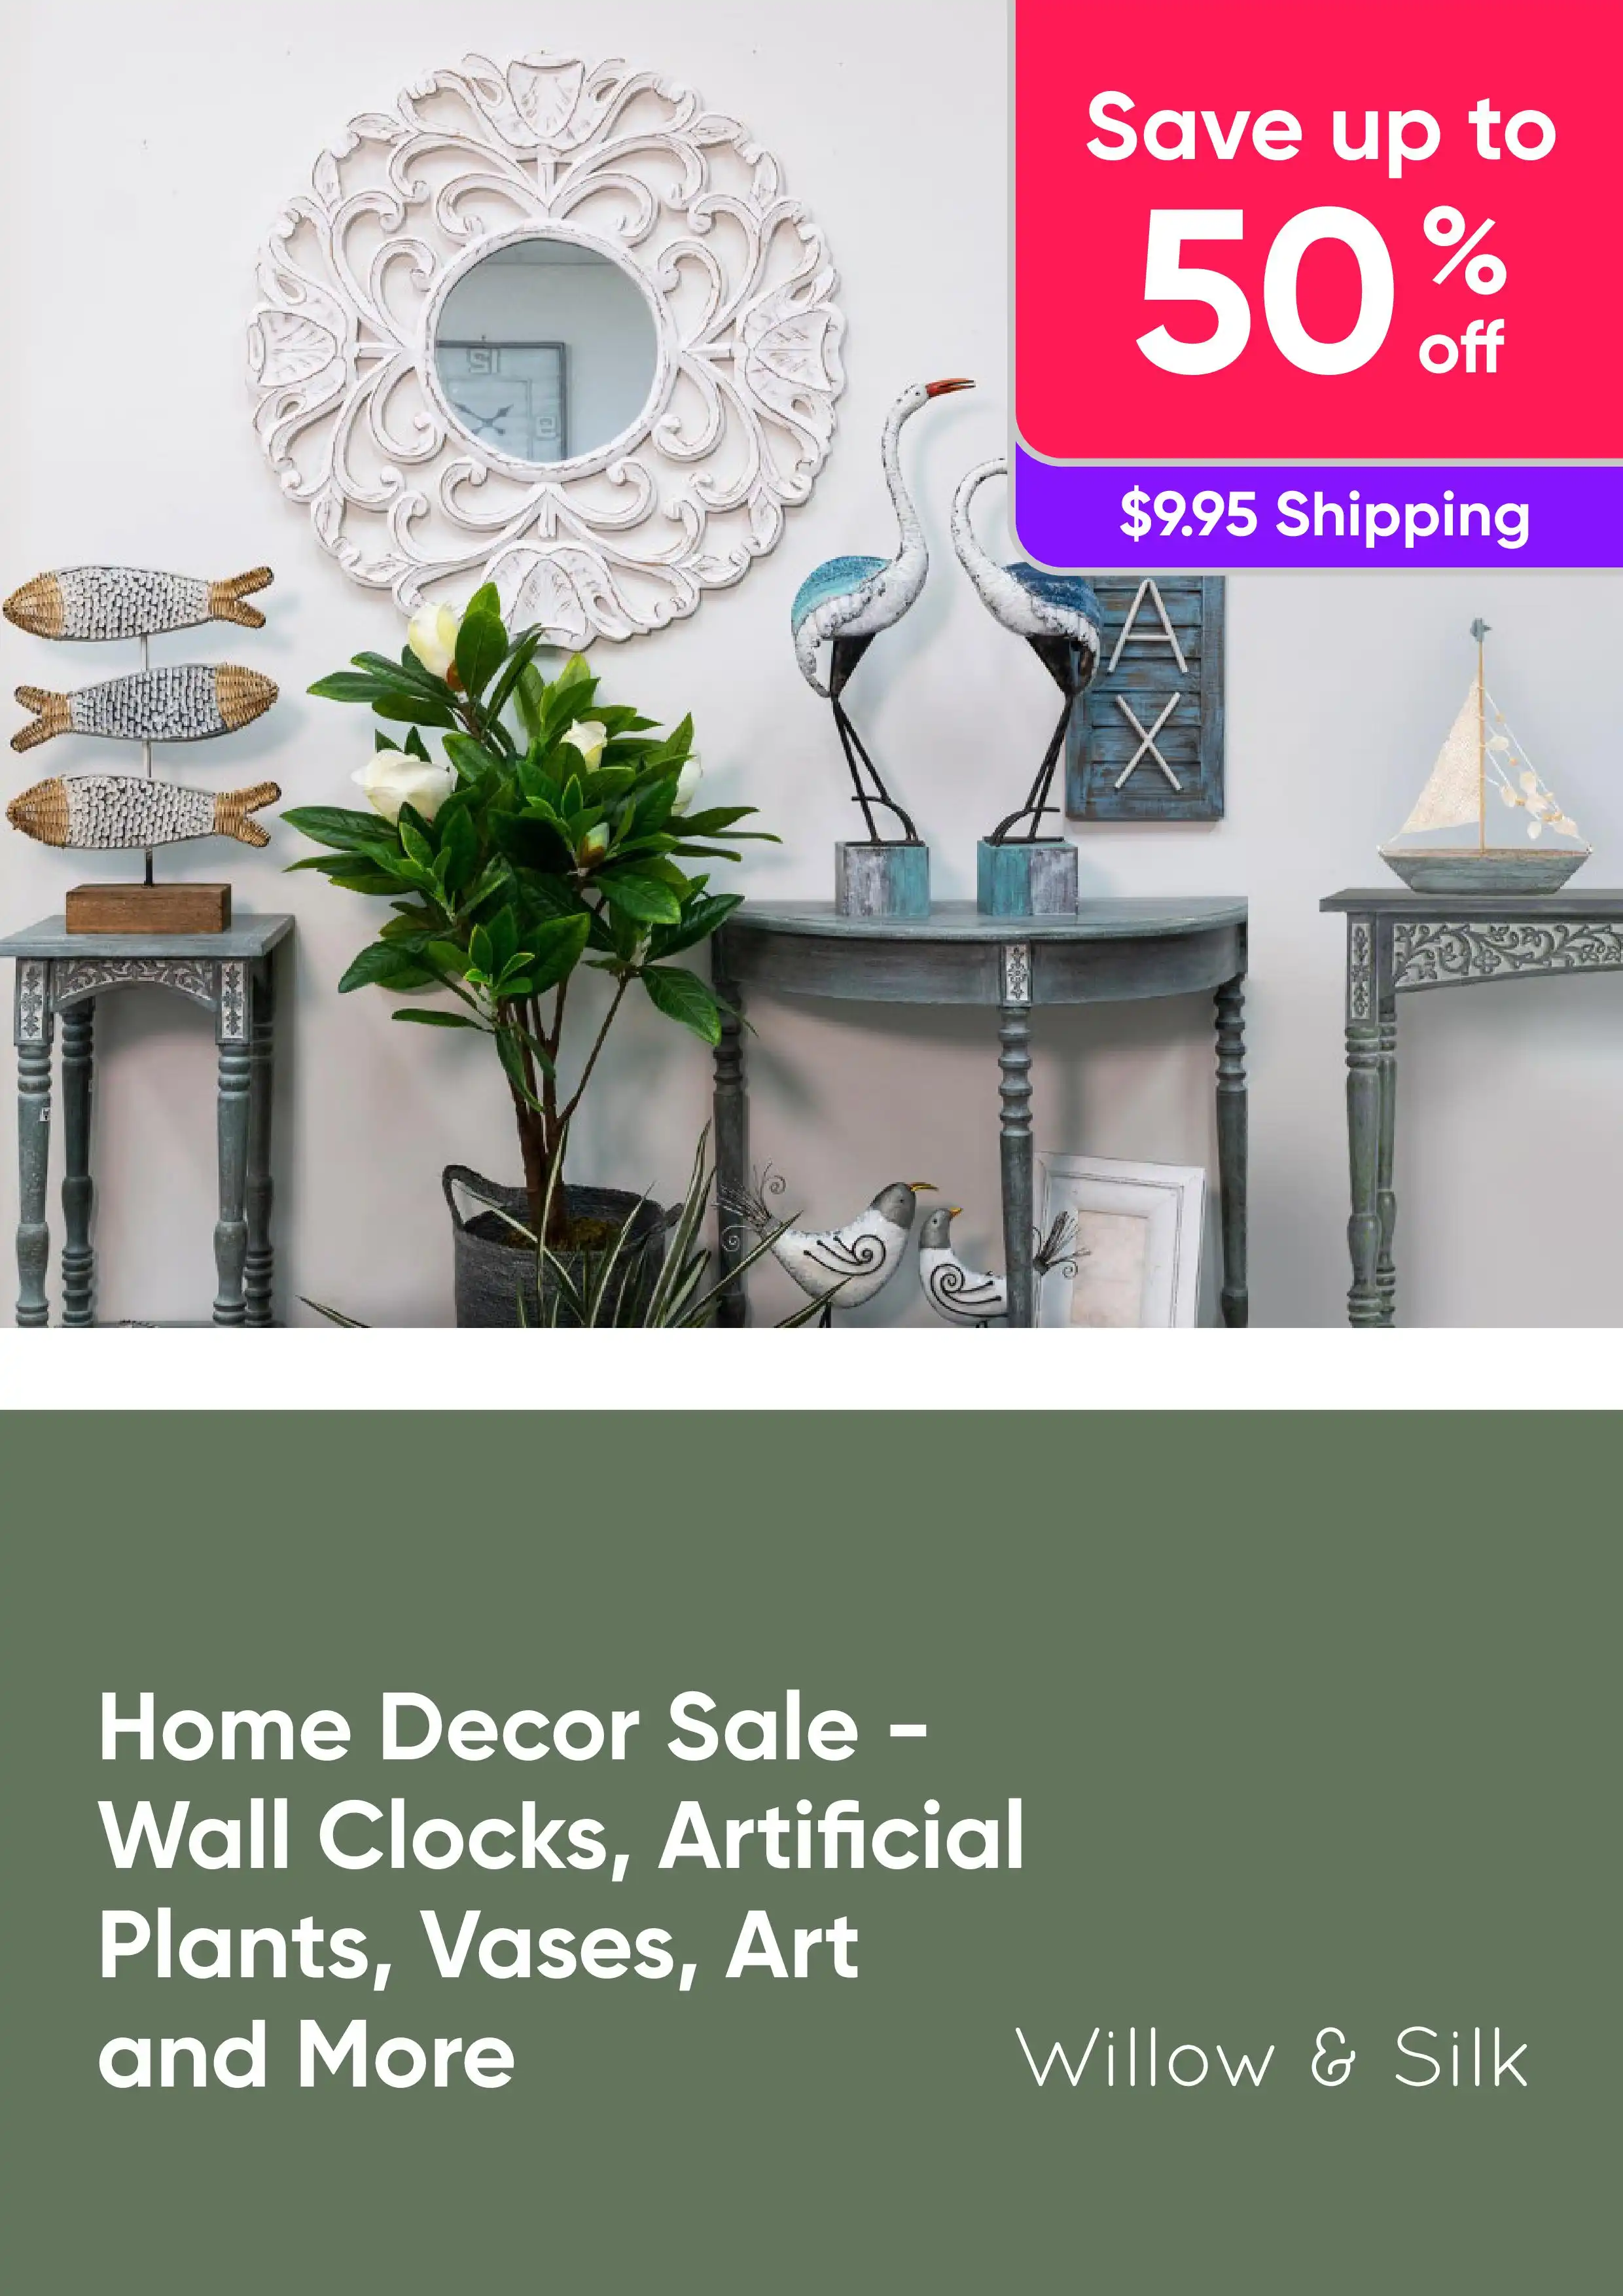 Home Decor Sale - Wall Clocks, Artificial Plants, Vases, Art and More